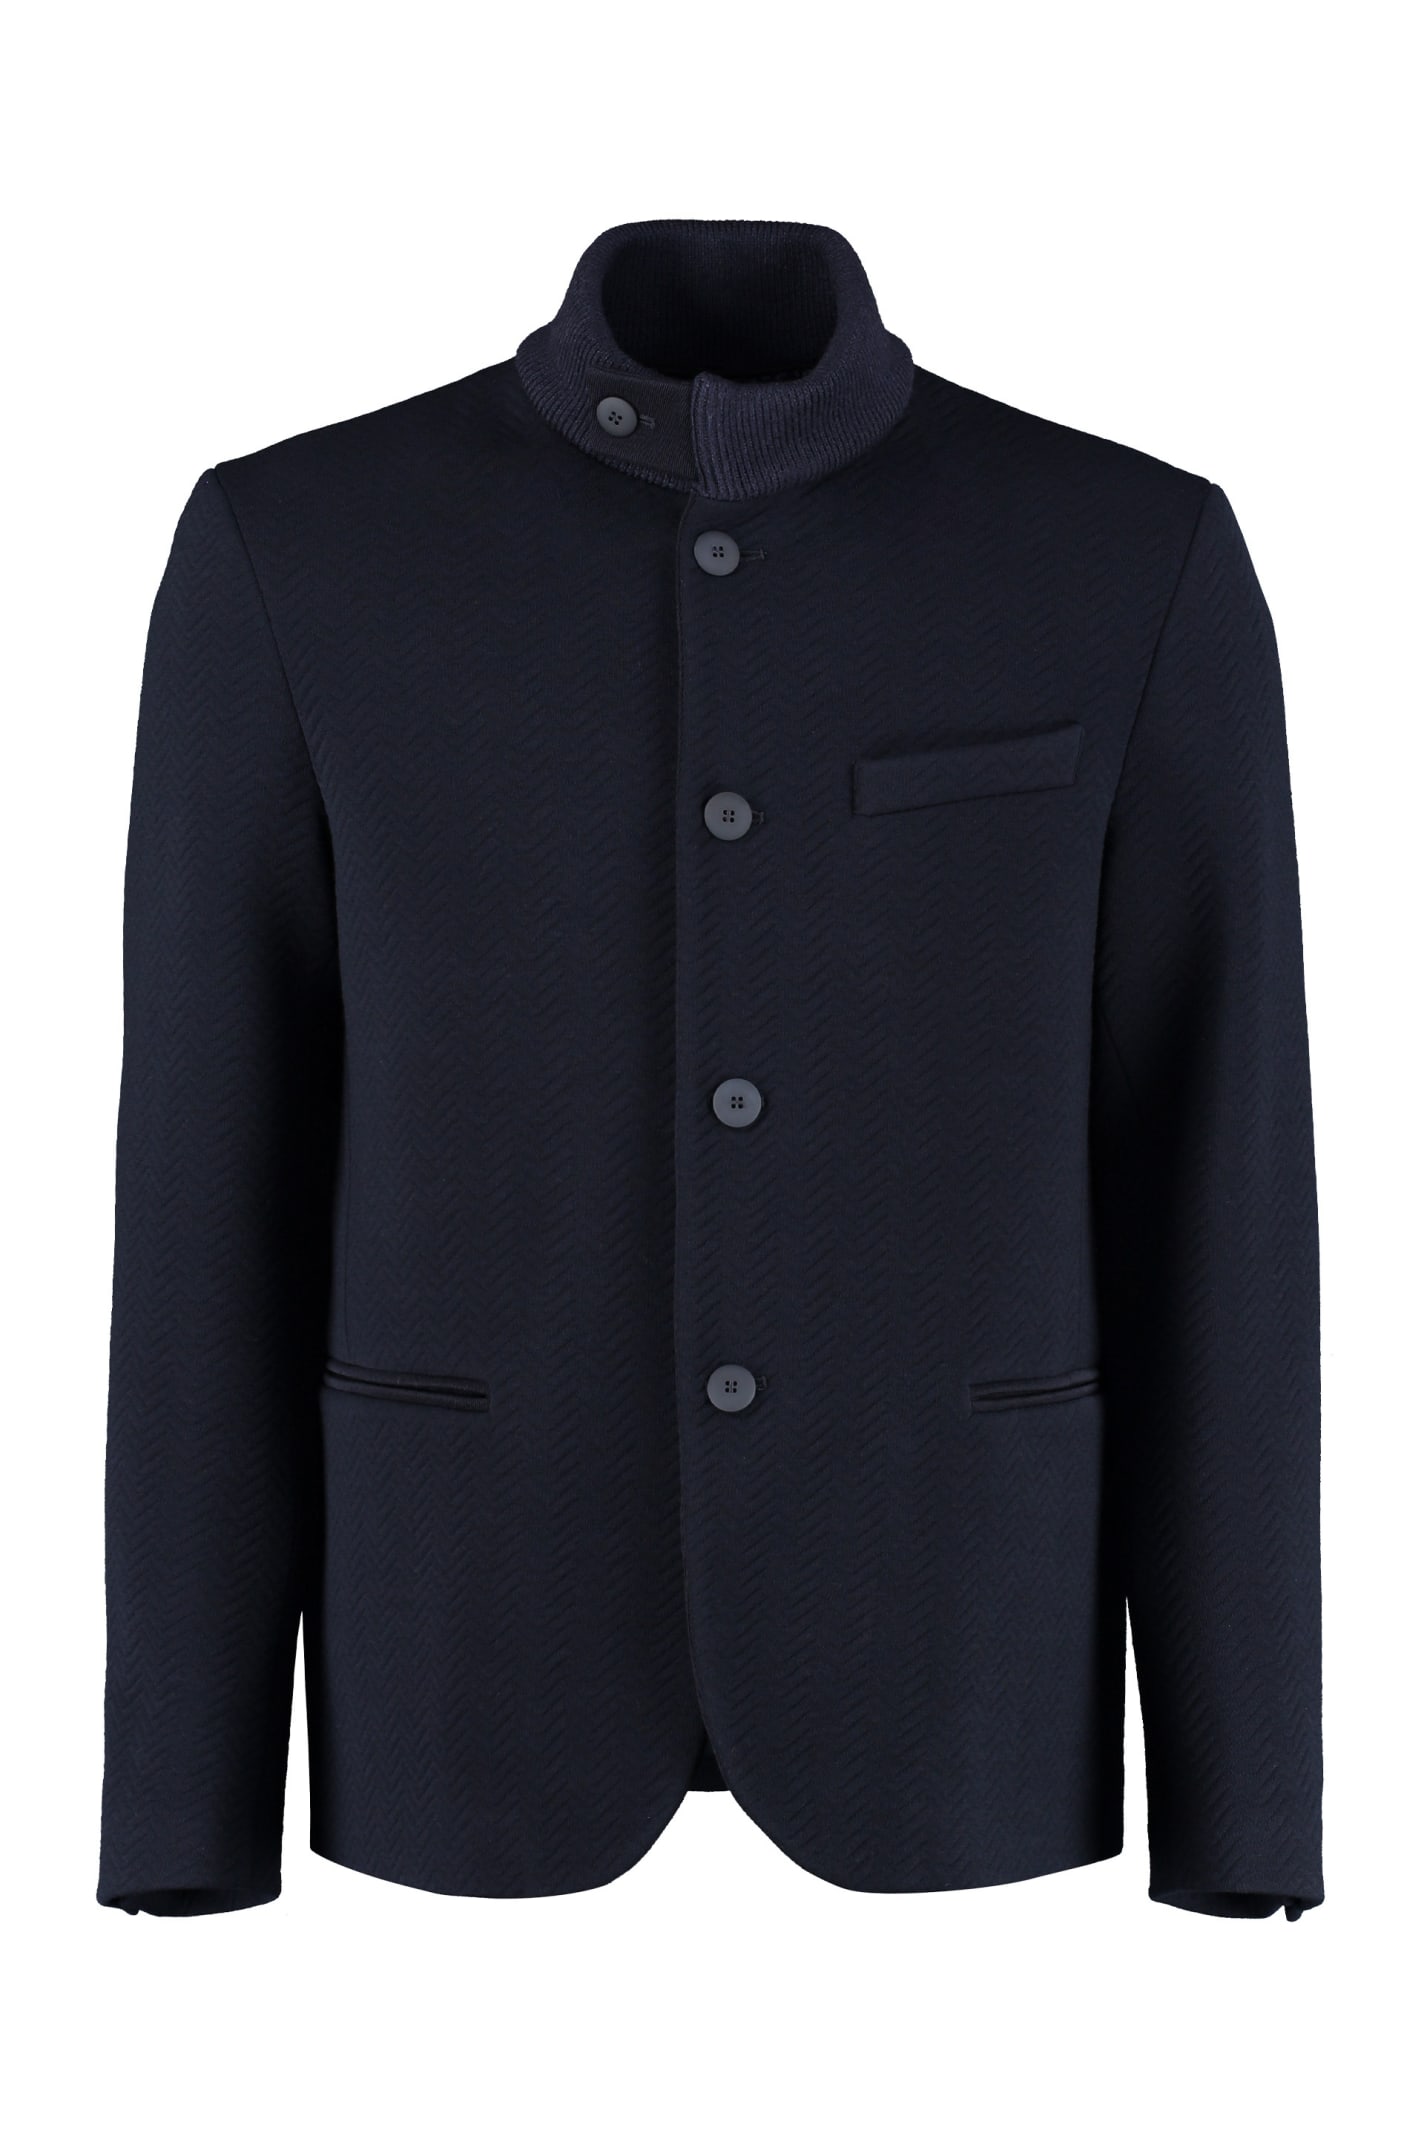 Giorgio Armani Quilted Single-breasted Wool Jacket